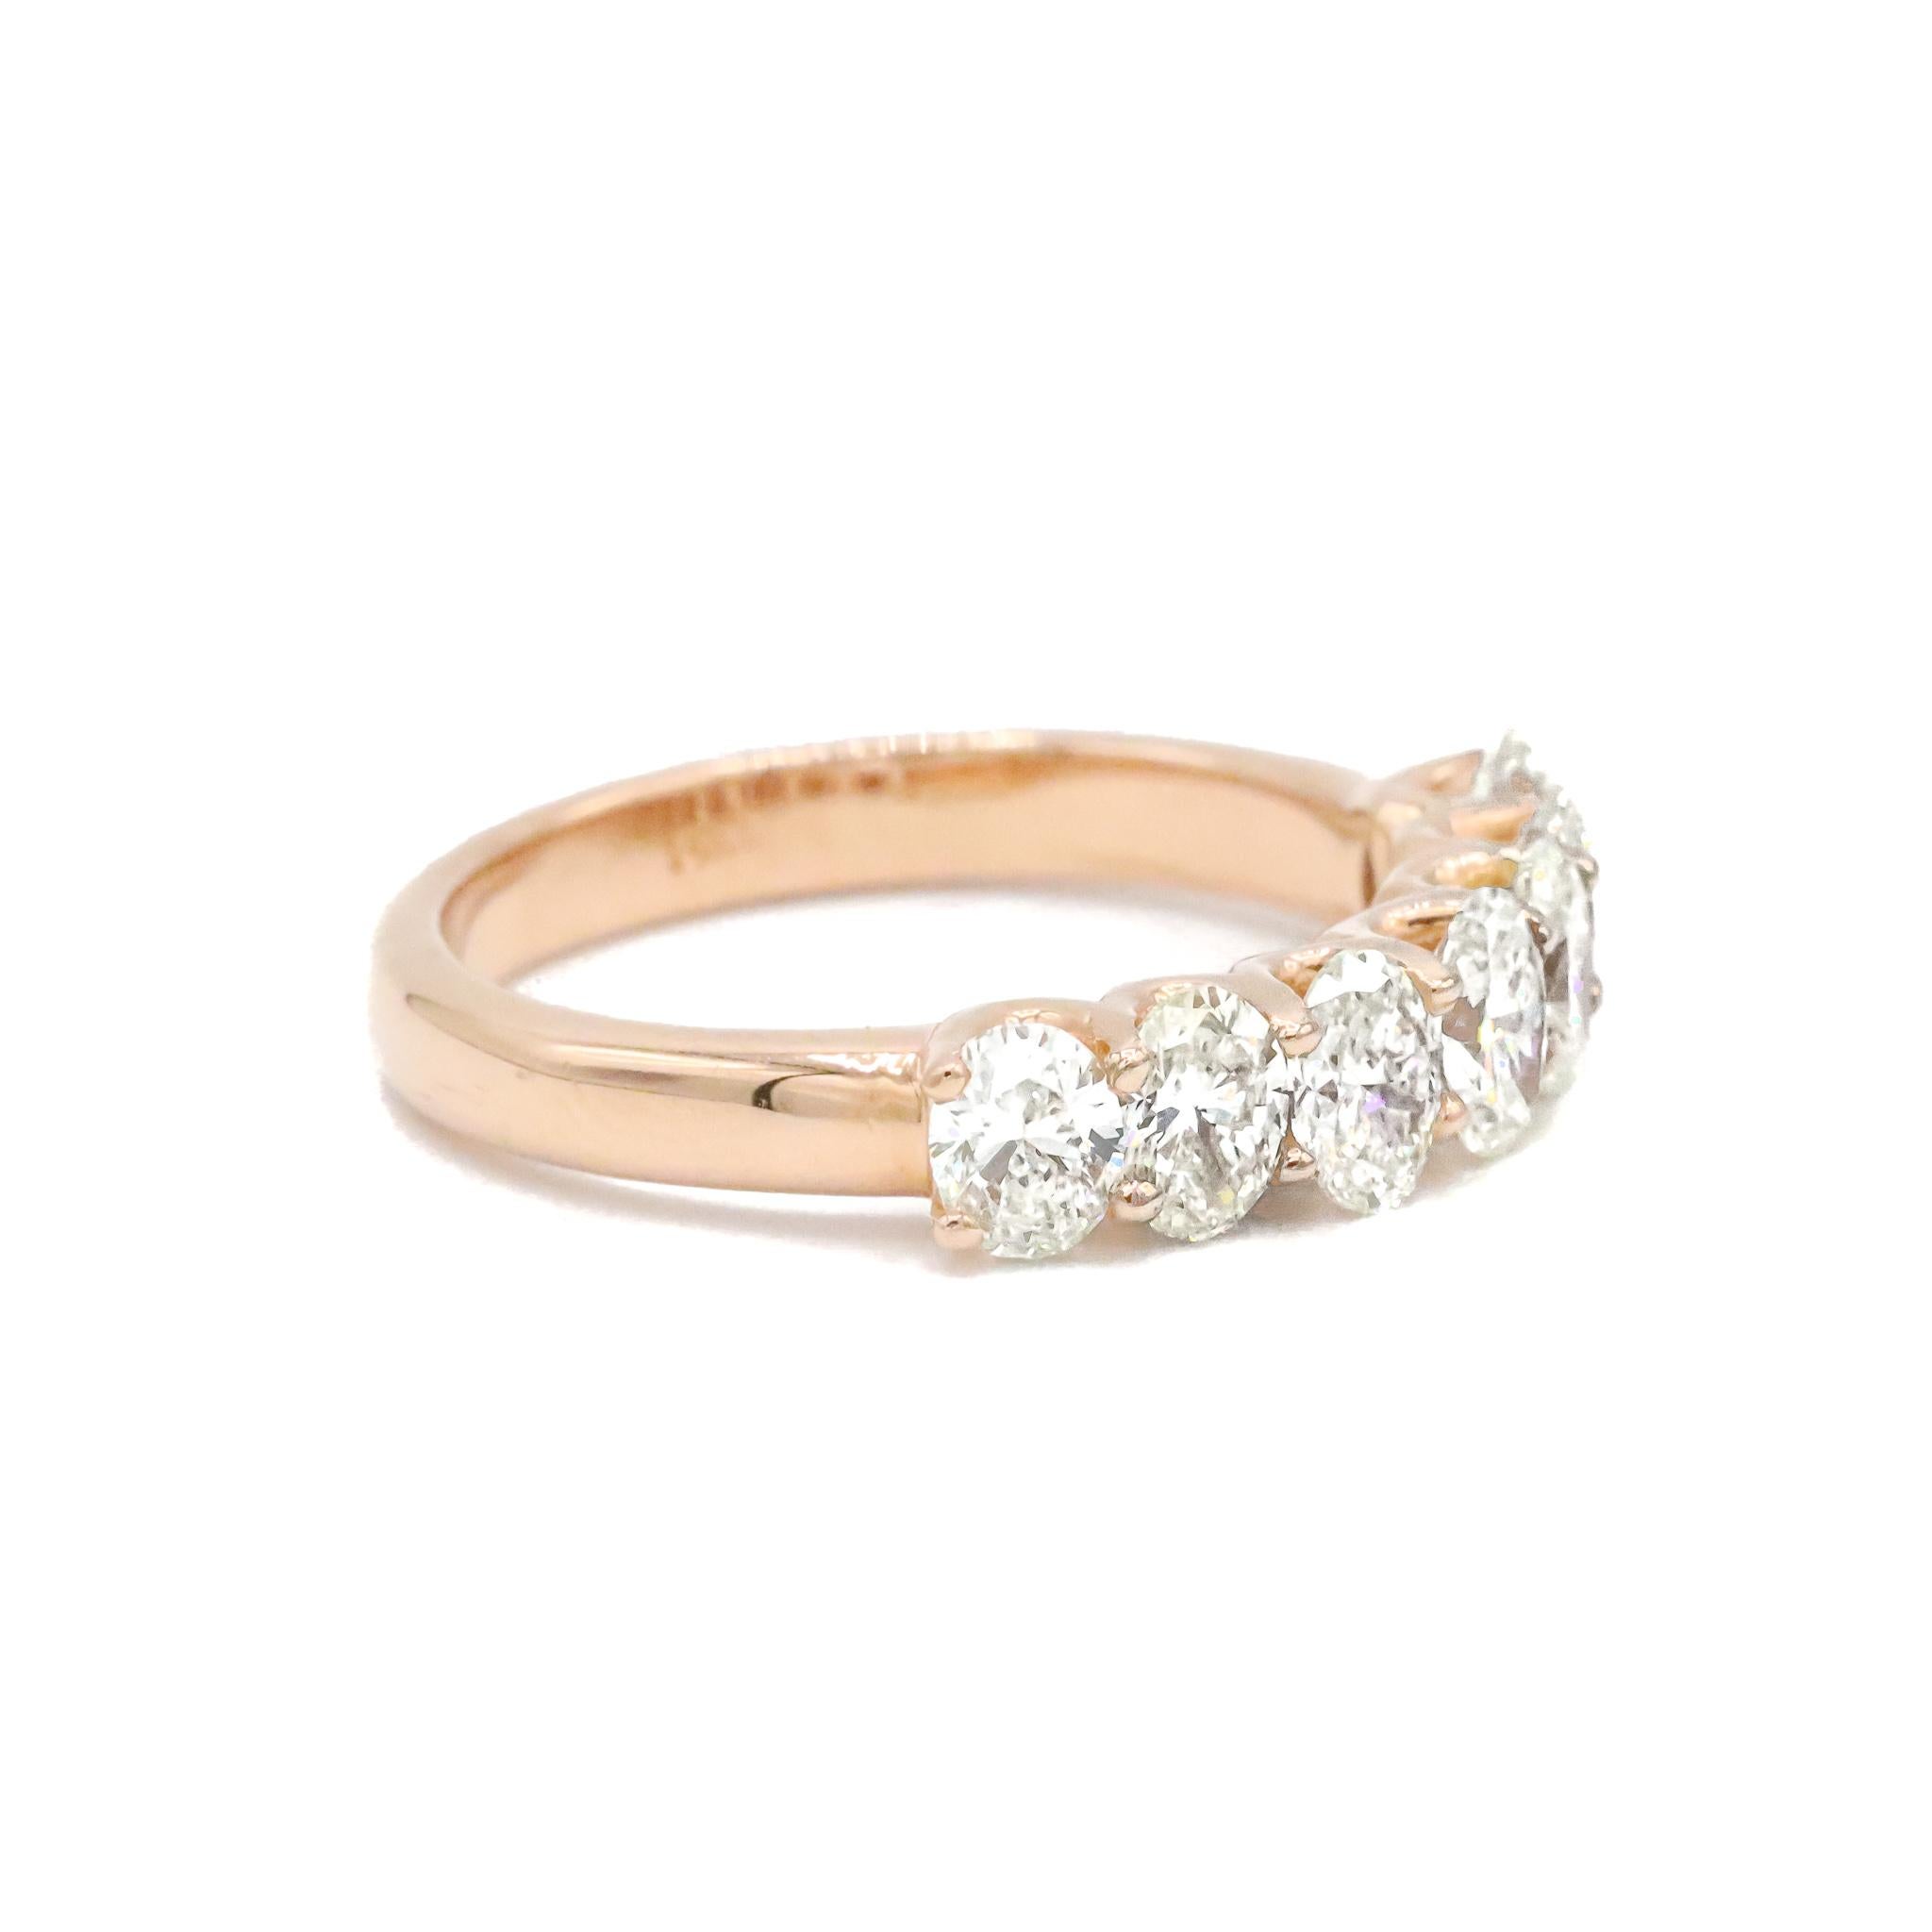 Ladies 14K Rose Gold 2.09Ct Ovals Eternity Ring In Excellent Condition For Sale In Houston, TX